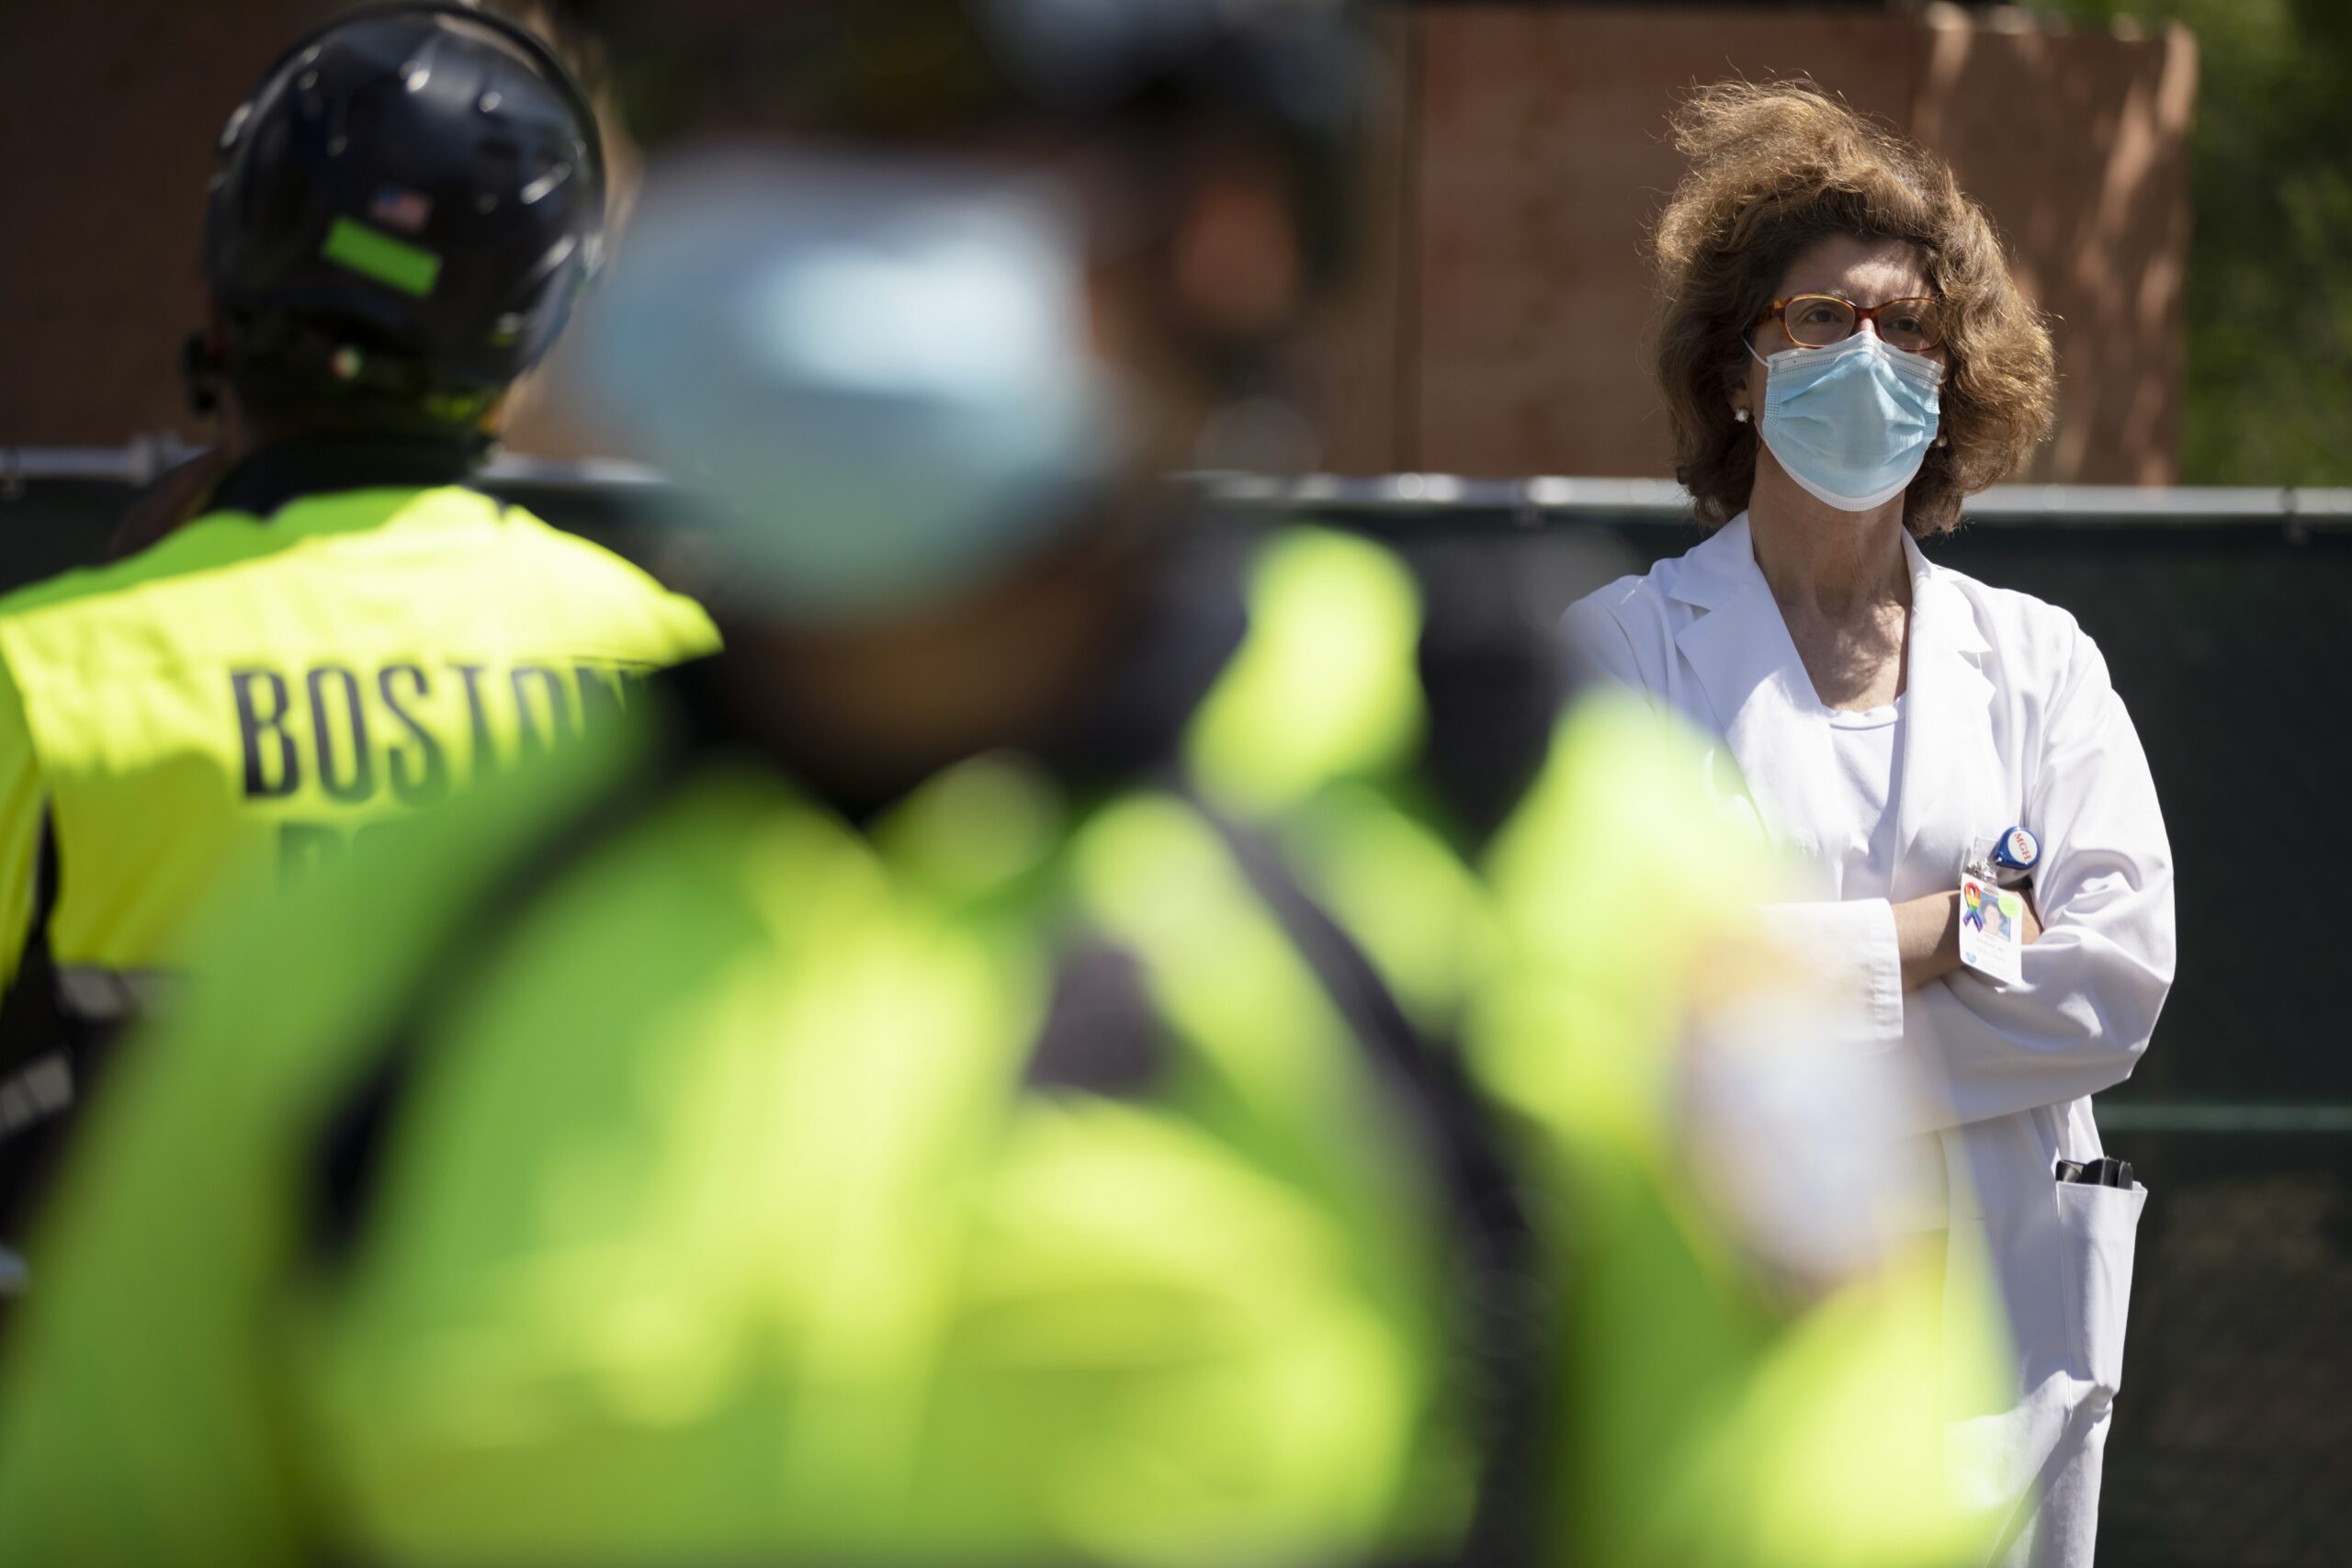 A doctor from Massachusetts General Hospital stands in counter-protest across the street from a demonstration calling for the lifting of all government restrictions related to concern about the spread of COVID-19.